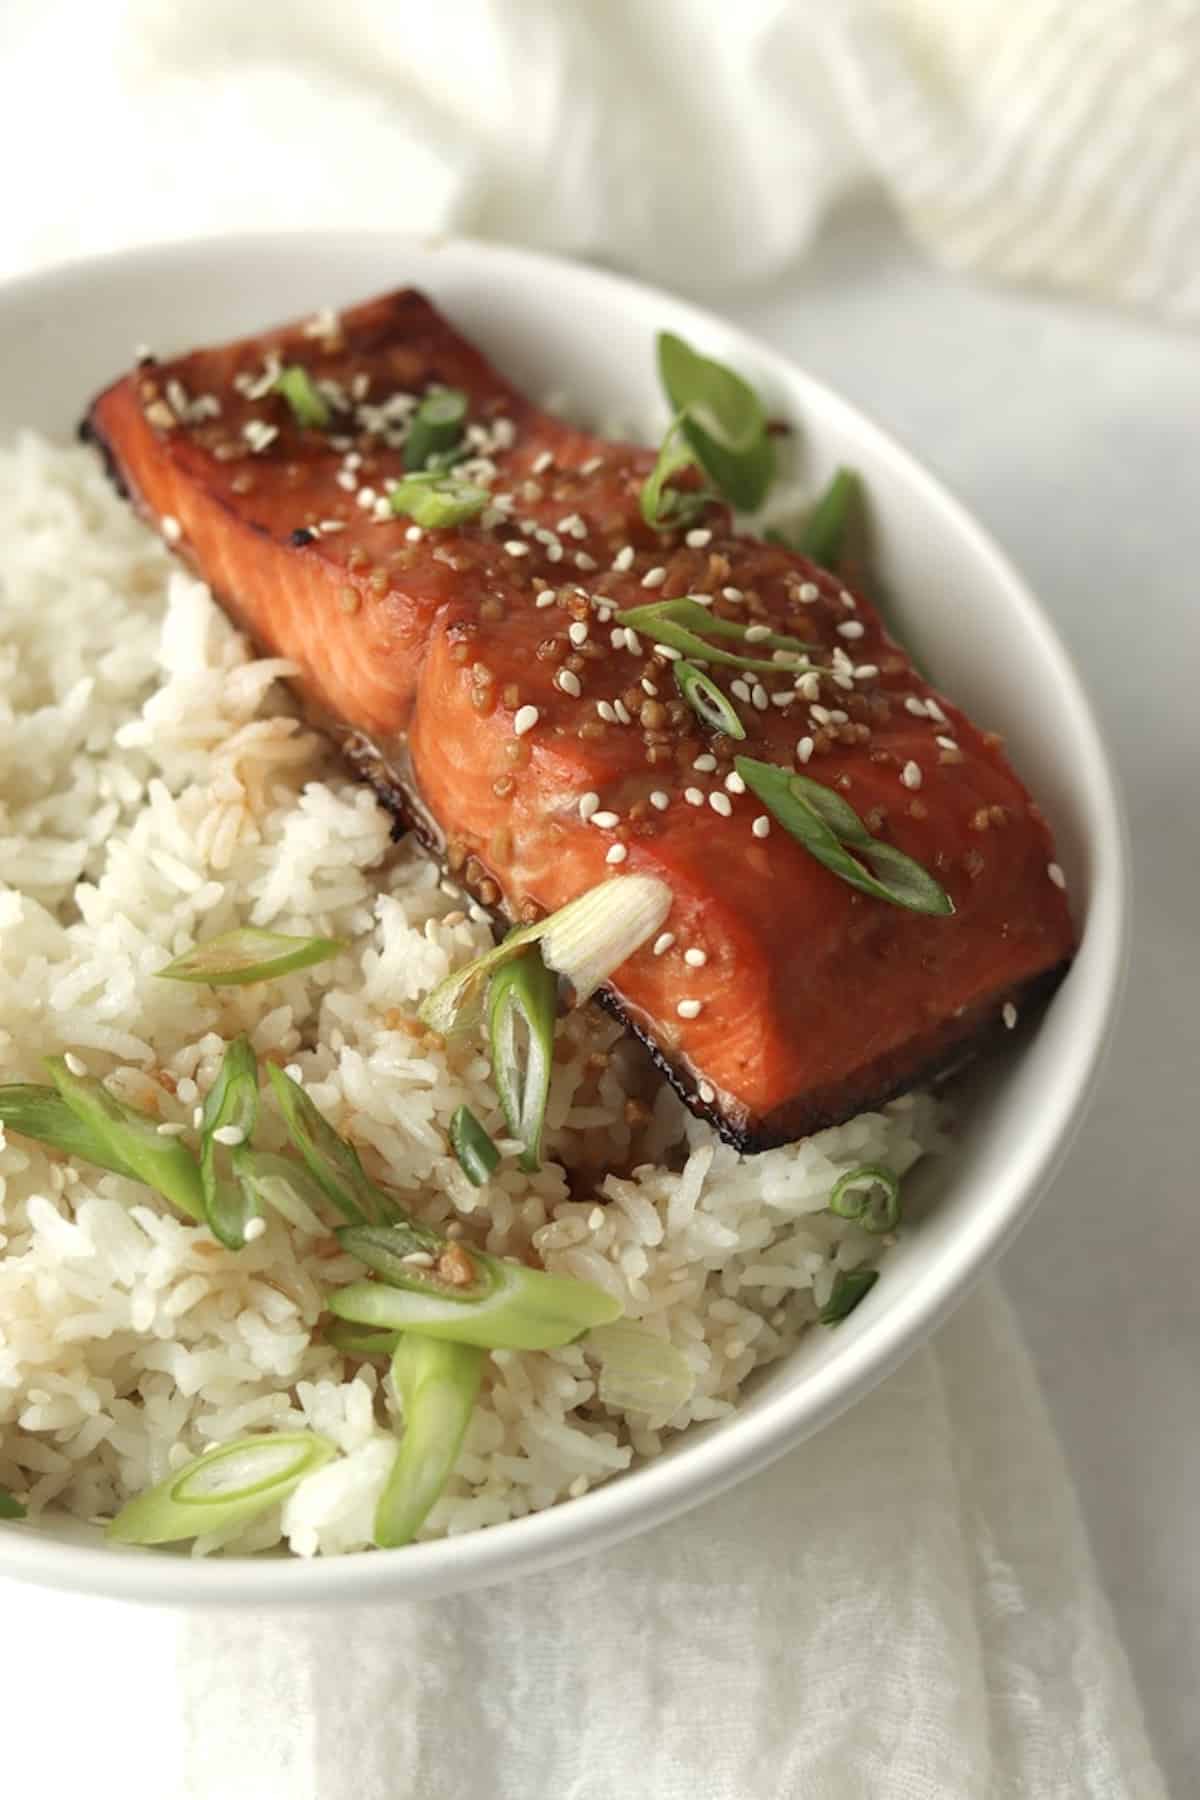 Honey garlic salmon over white rice with green onions.